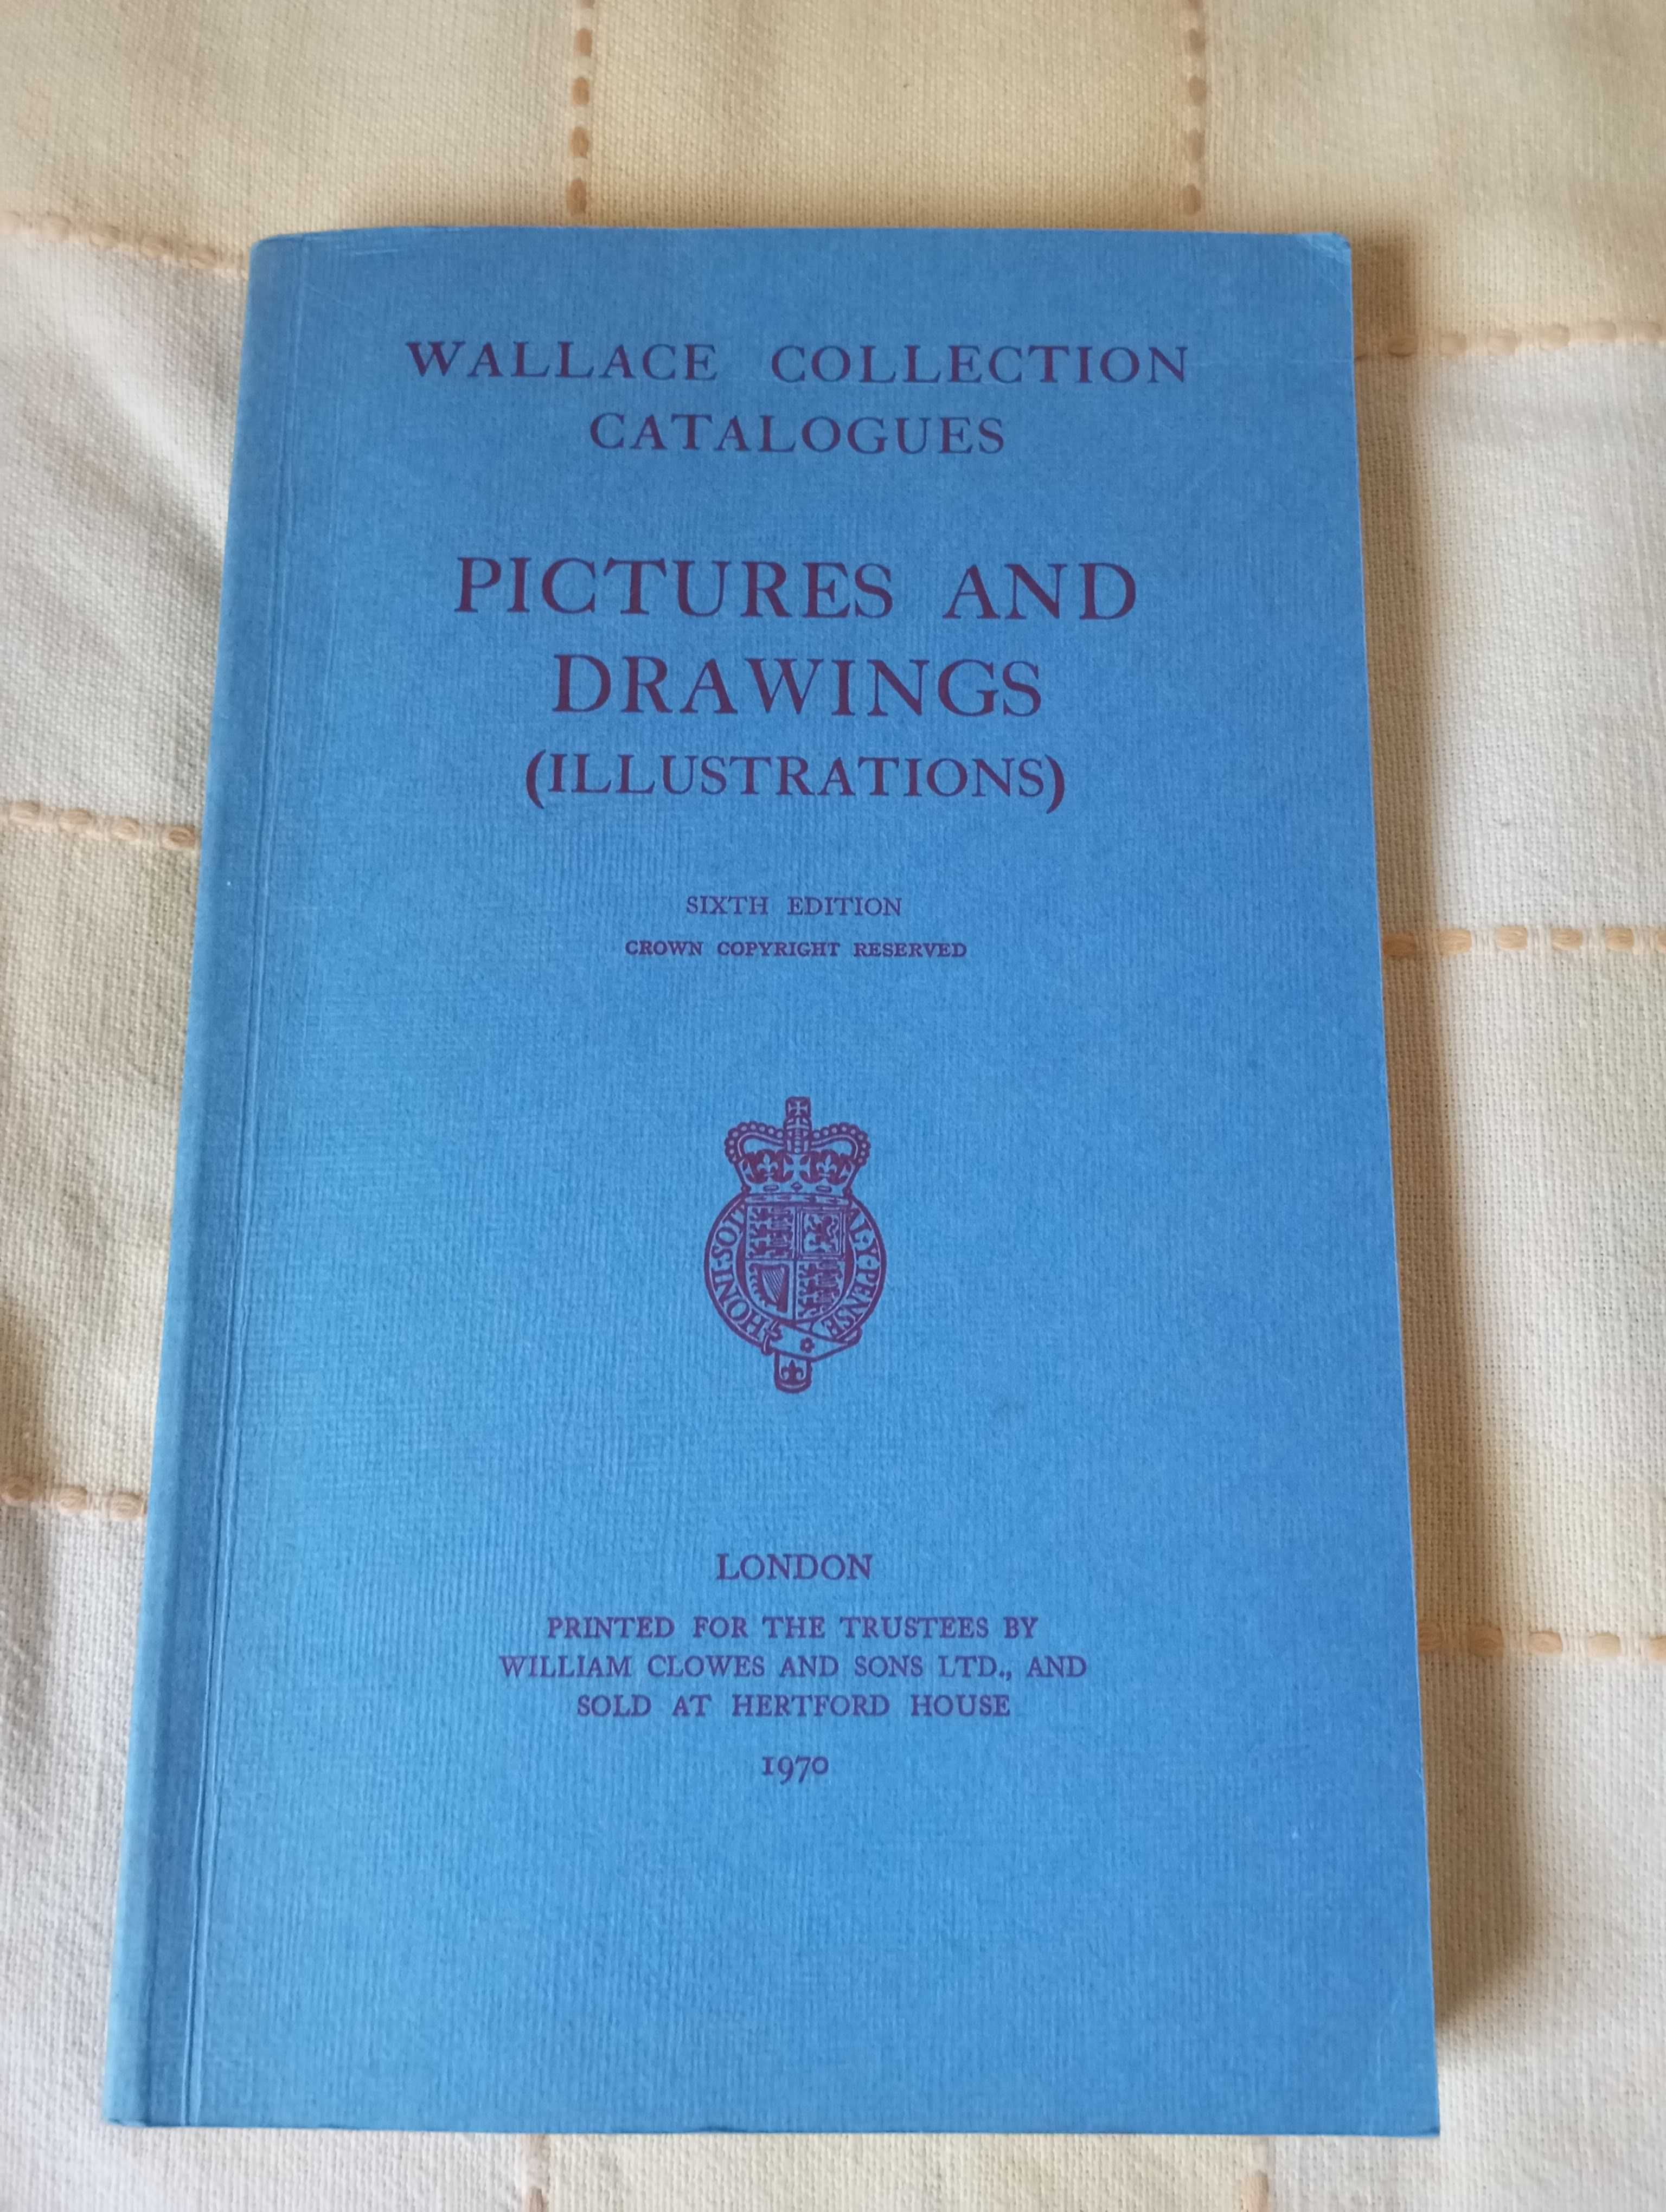 Wallace Collection Catalogues - Pictures and Drawings (Ilustrations)